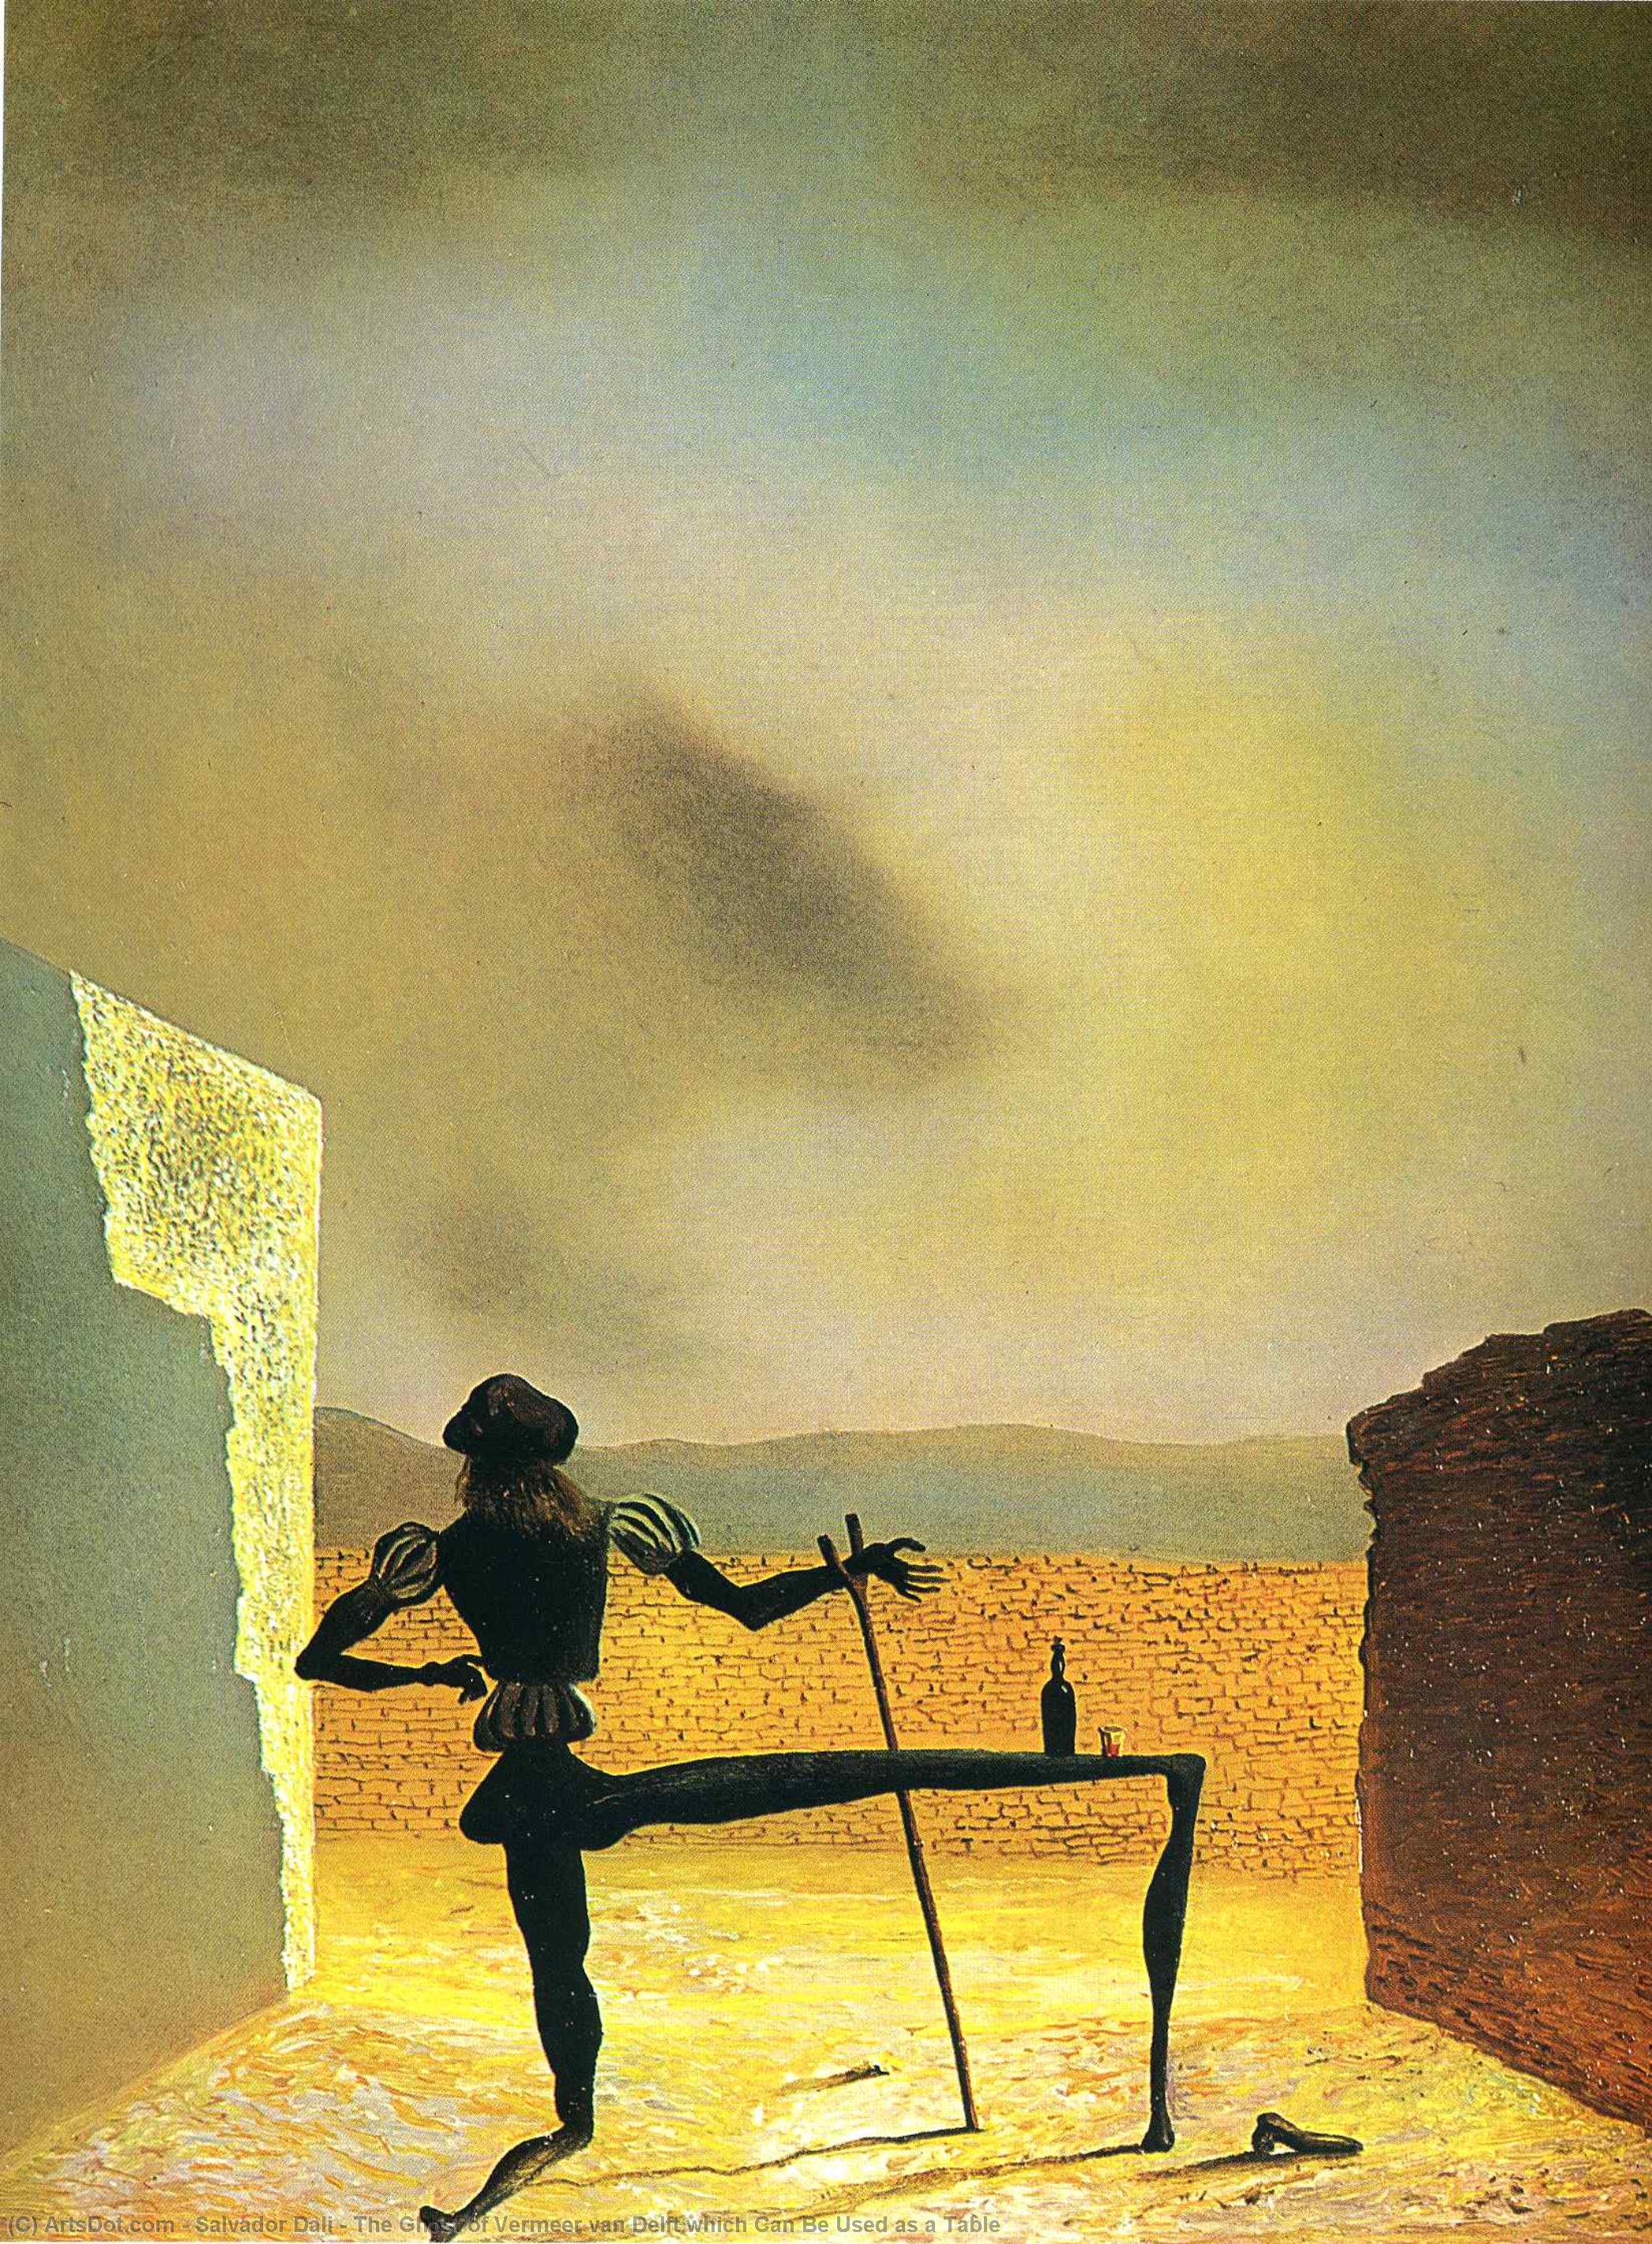 Wikioo.org - สารานุกรมวิจิตรศิลป์ - จิตรกรรม Salvador Dali - The Ghost of Vermeer van Delft which Can Be Used as a Table